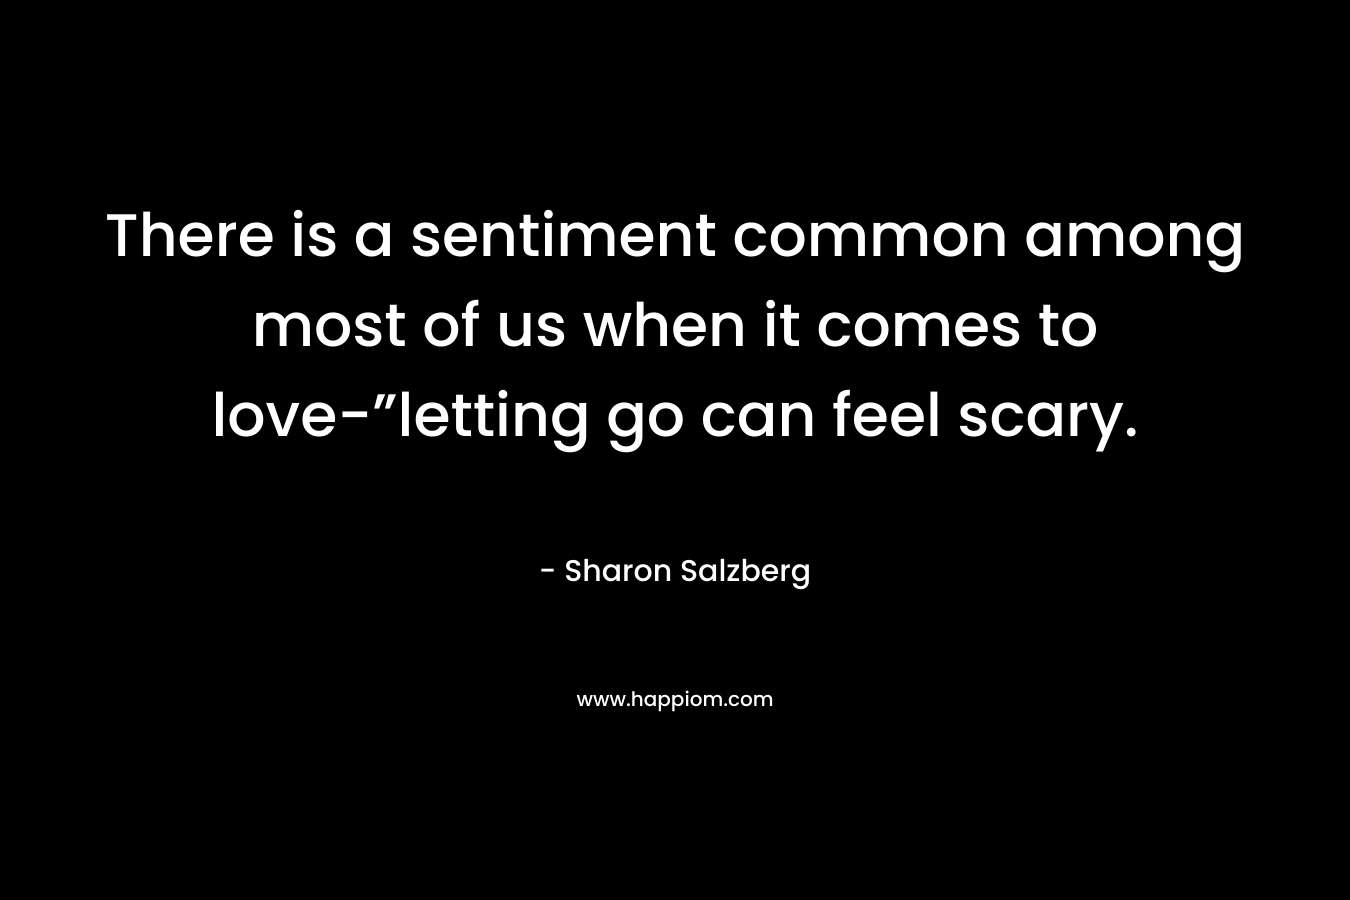 There is a sentiment common among most of us when it comes to love-”letting go can feel scary.